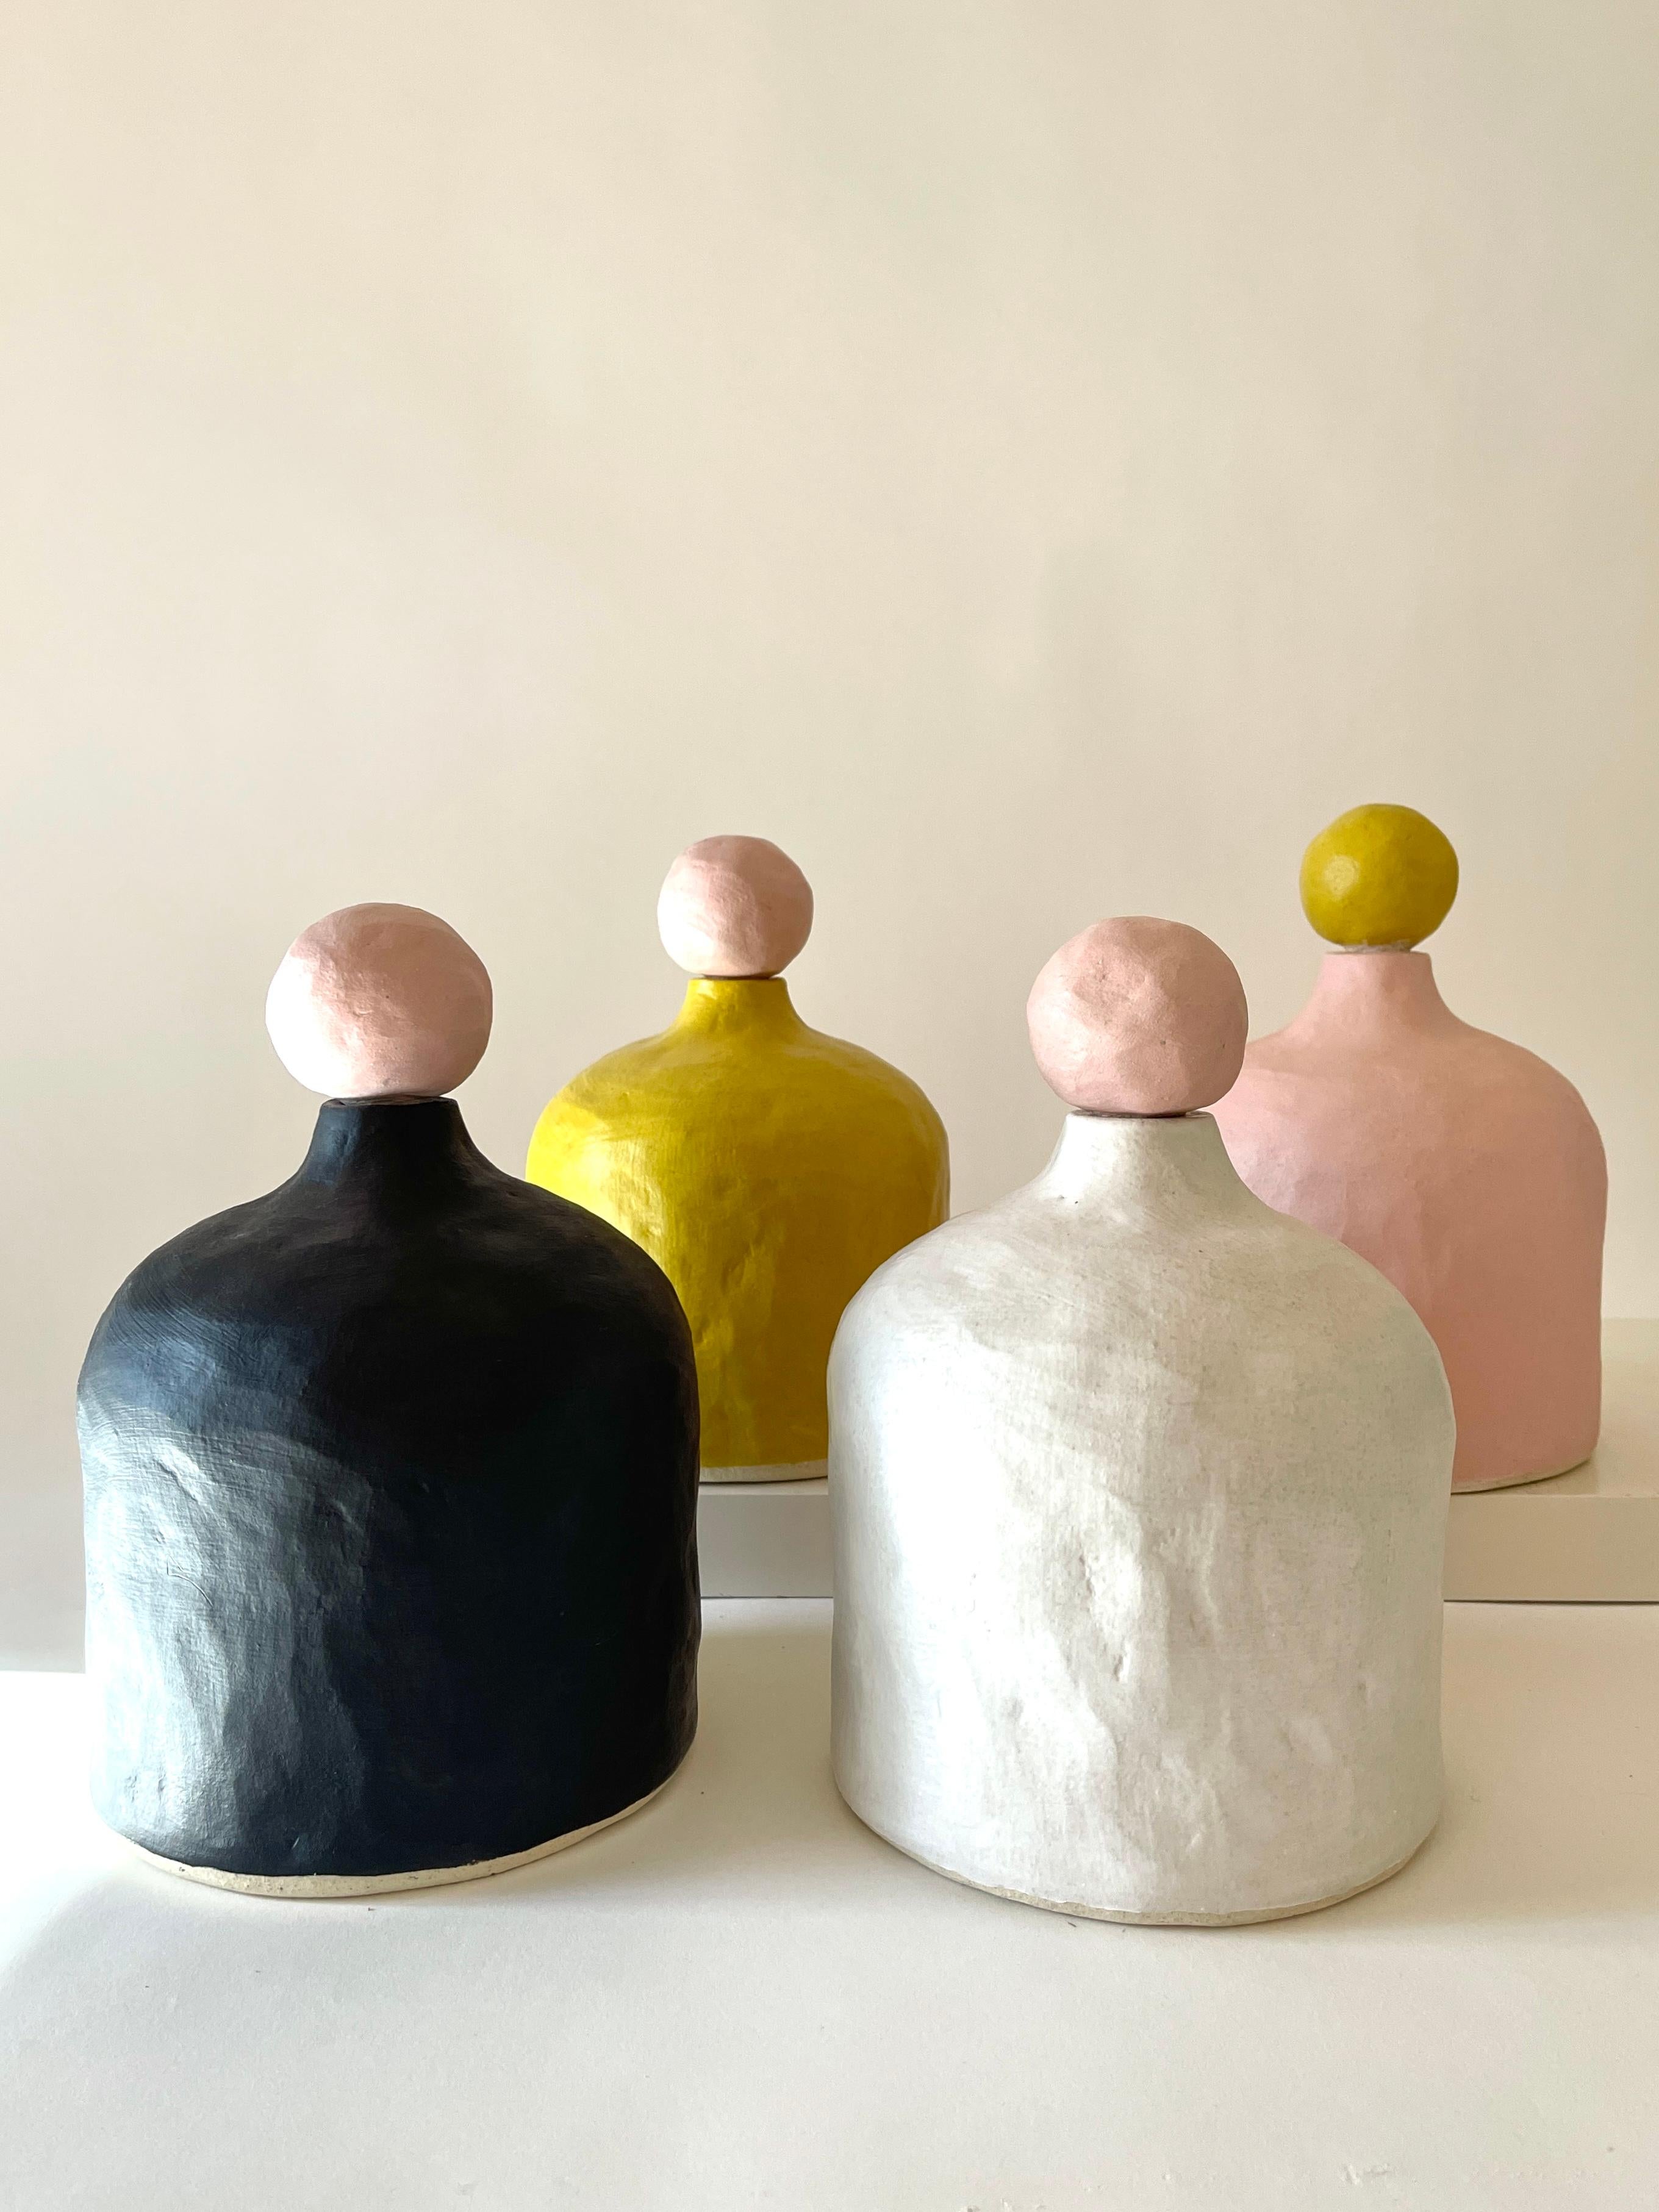 Set of 4 Annie Vases by Meg Morrison
One of a kind.
Materials: Ceramic.
Dimensions: D 15.5 x H 21.5 cm (each).

All sizes are approximate. Although vases are watertight condensation may form on the bottom. Please protect delicate surfaces.